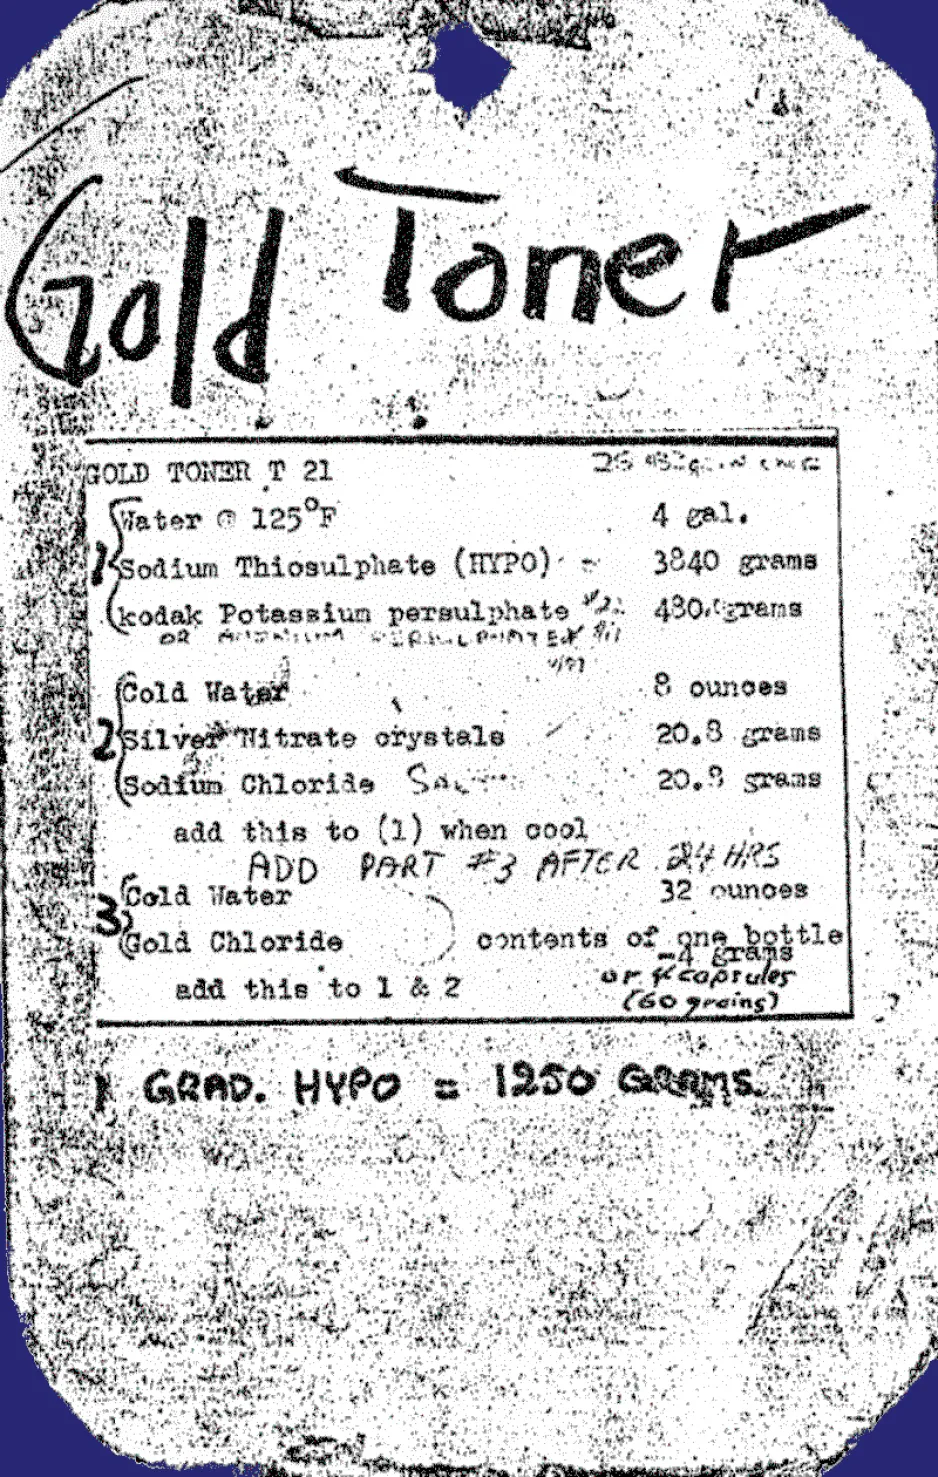 A copy of Karsh’s recipe for the gold toner with his handwritten notes 